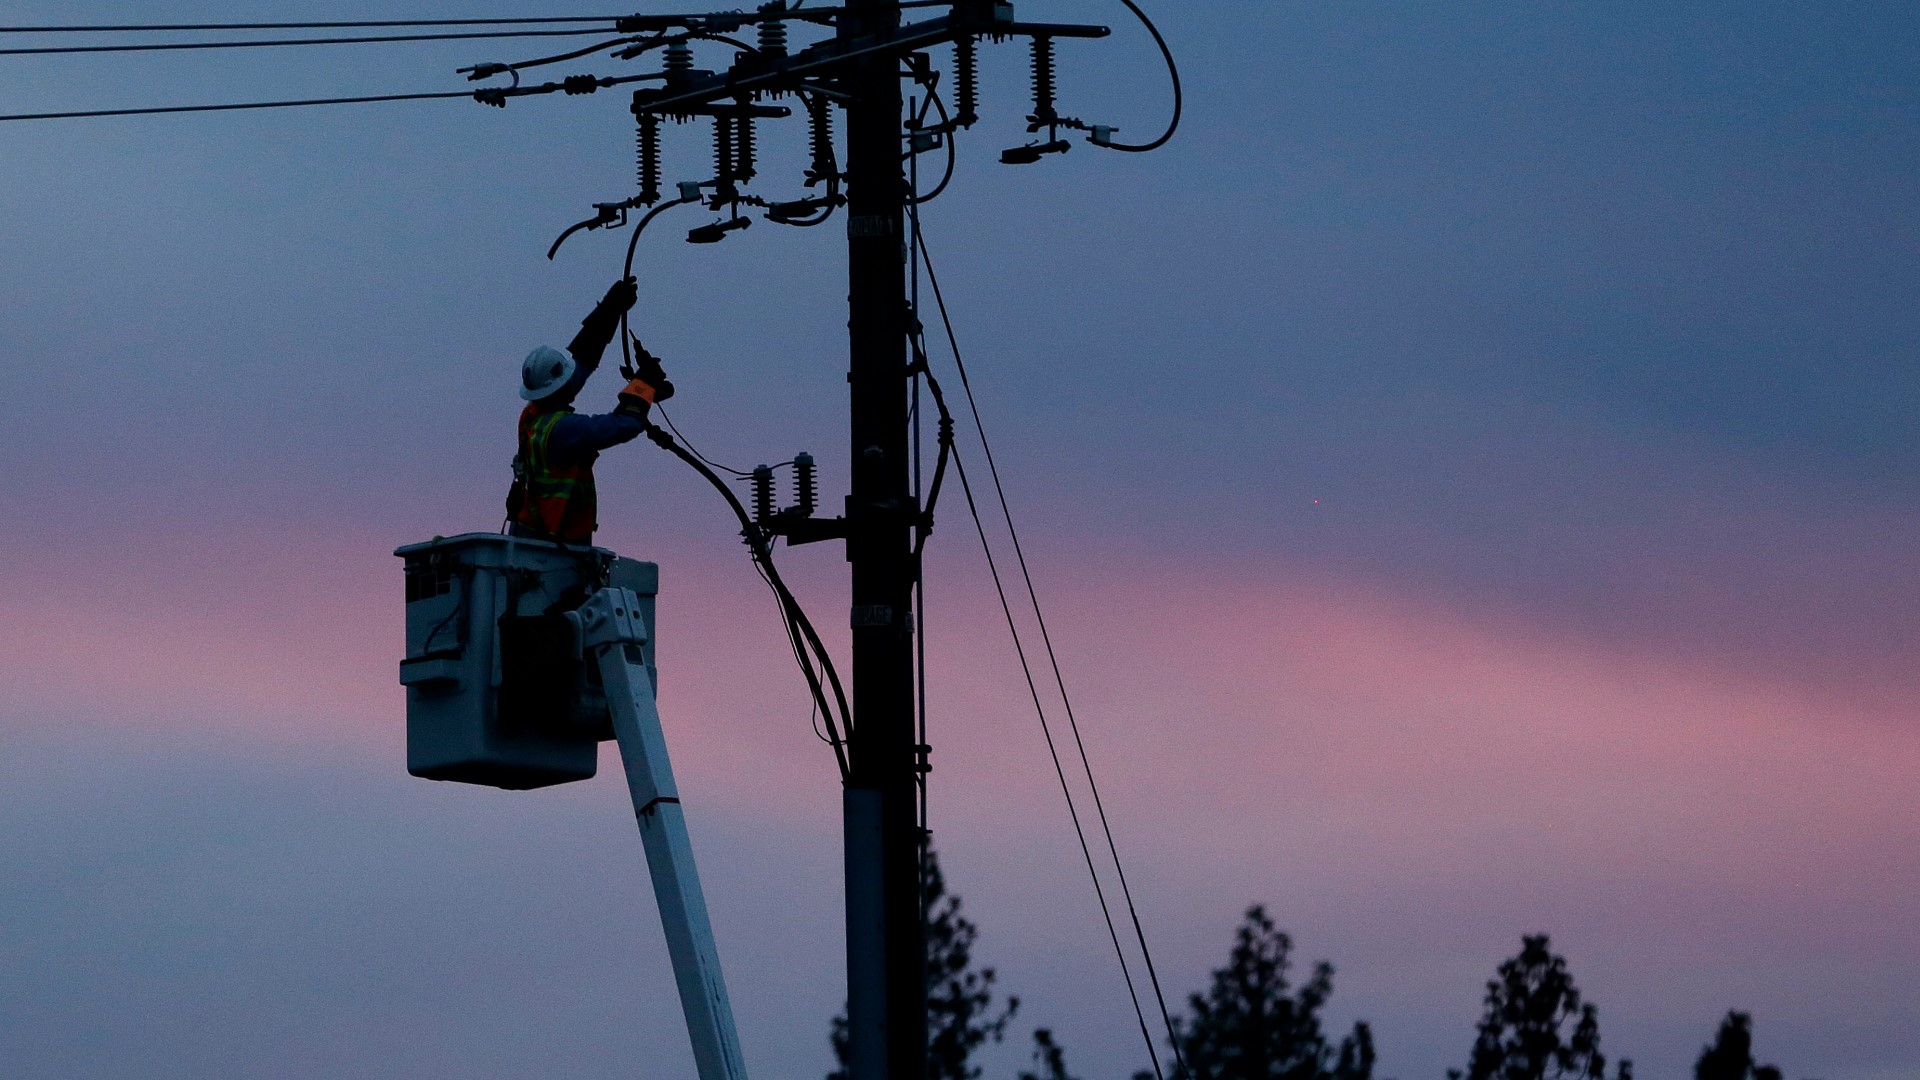 PG&E's plan to avoid wildfires comes with dangers of its own, as power shutoffs can impact communication and medical equipment.